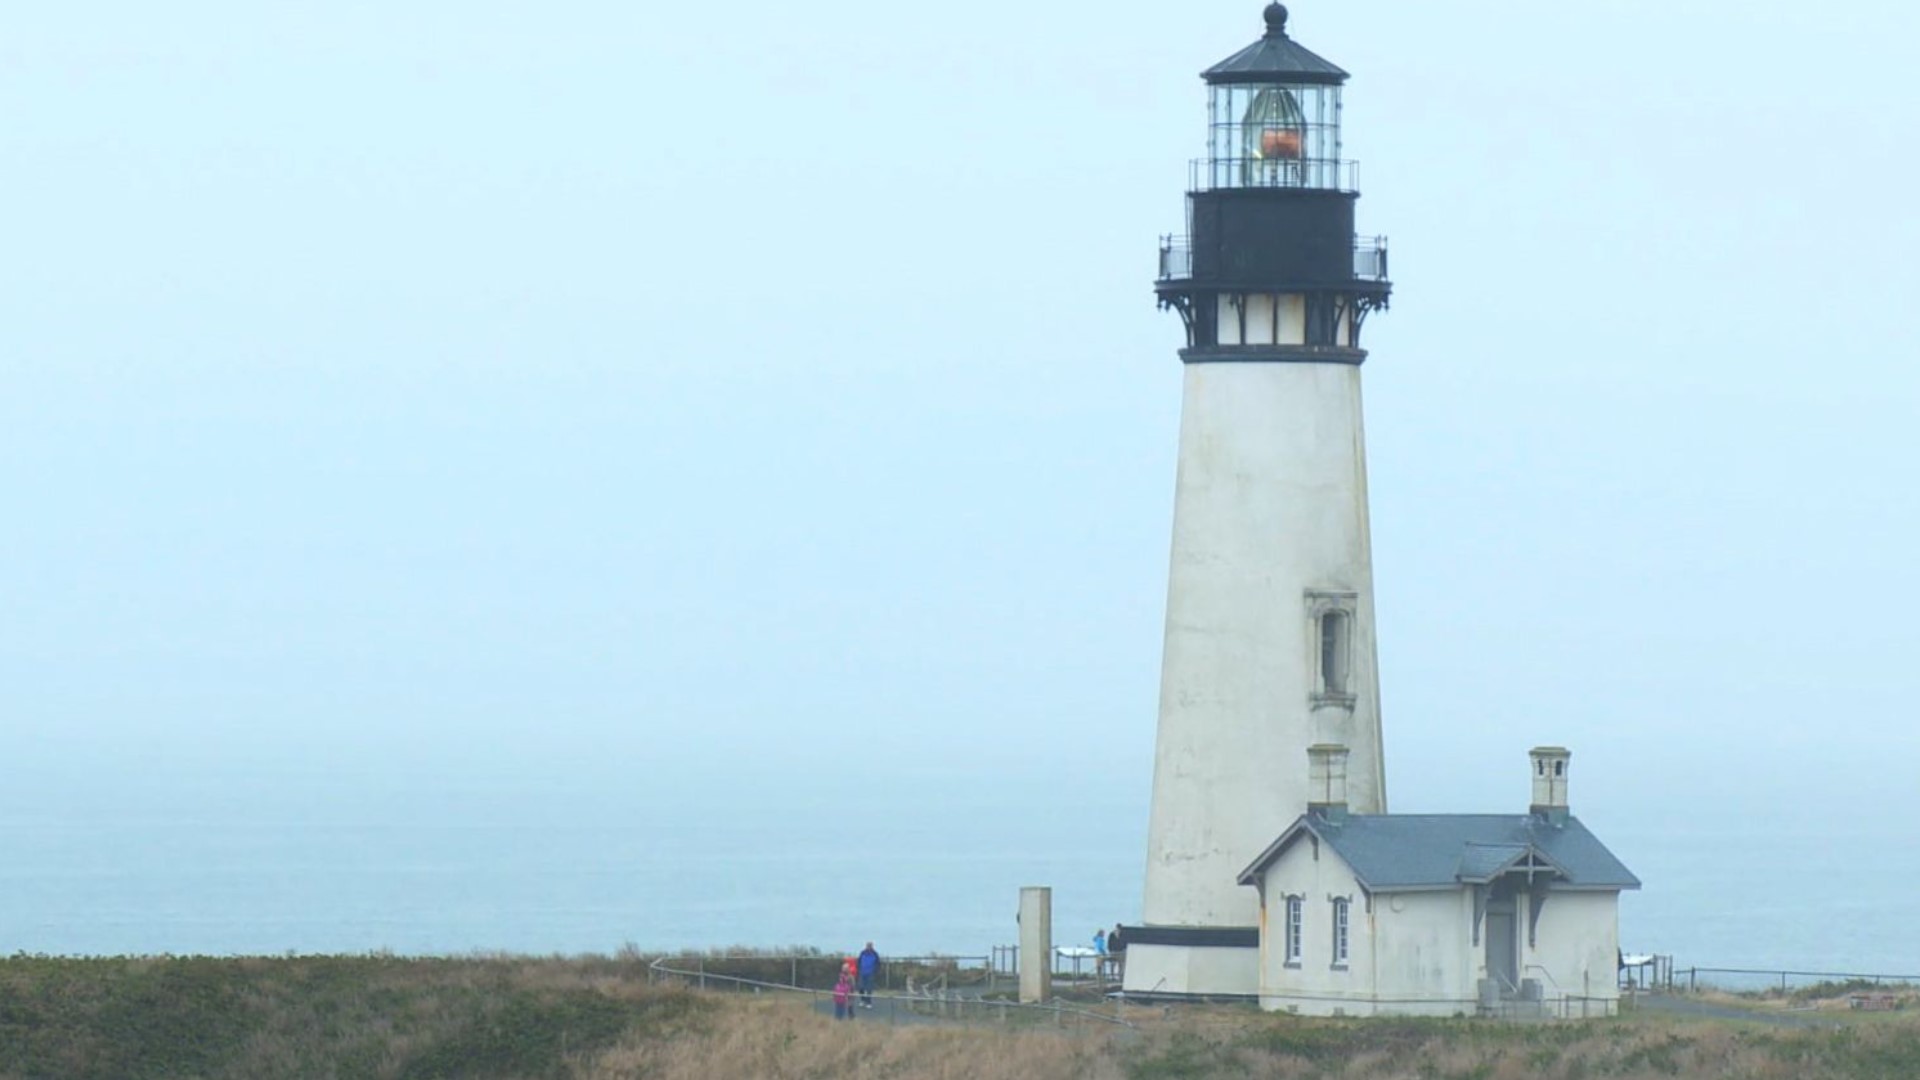 This week, we go inside one of the finest of Oregon’s prized whitewashed wonders that’s also a parkland and a natural area filled with surprises at Yaquina Headland.